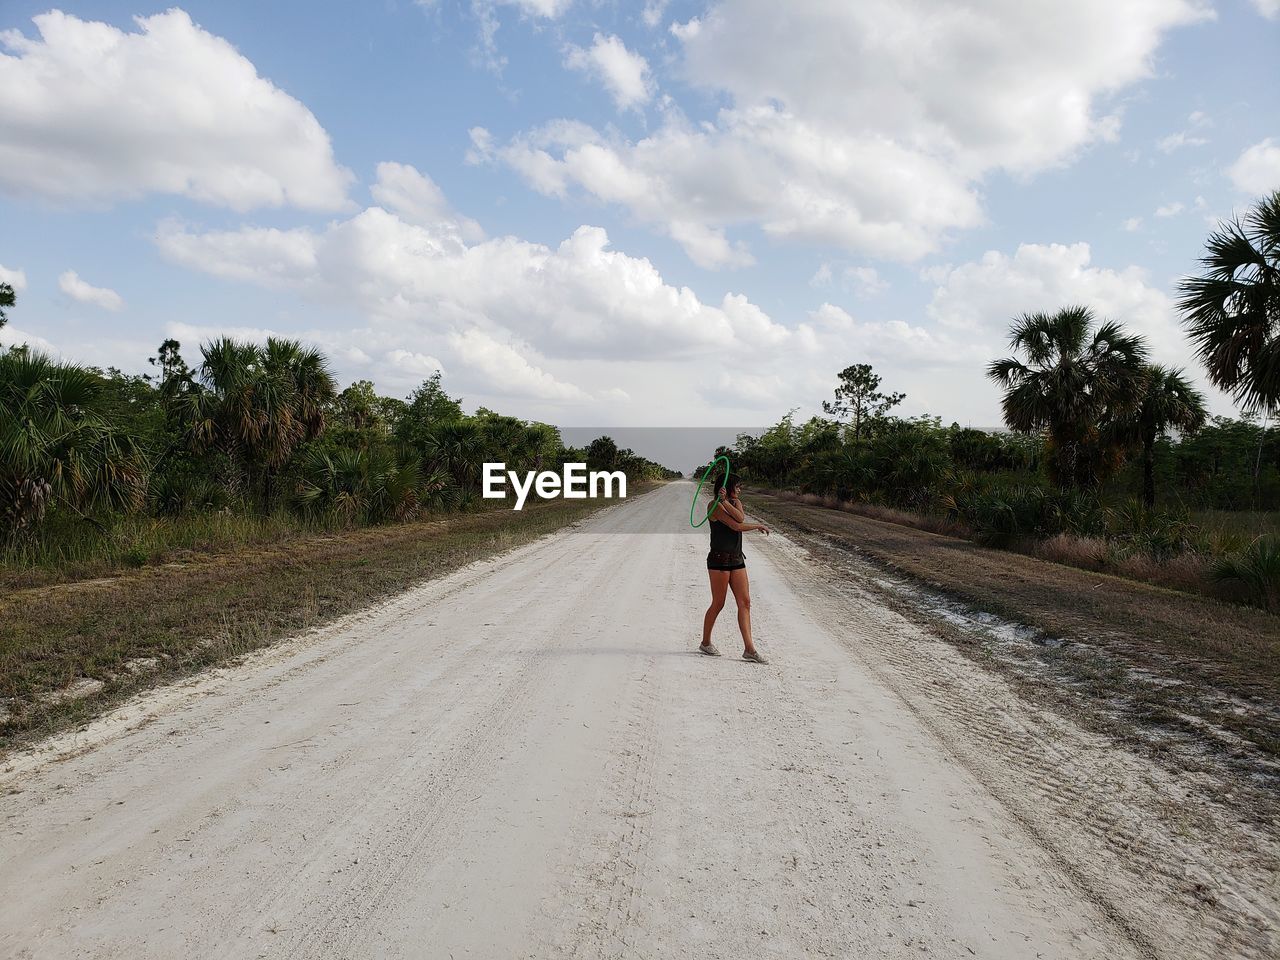 Woman standing on dirt road against cloudy sky